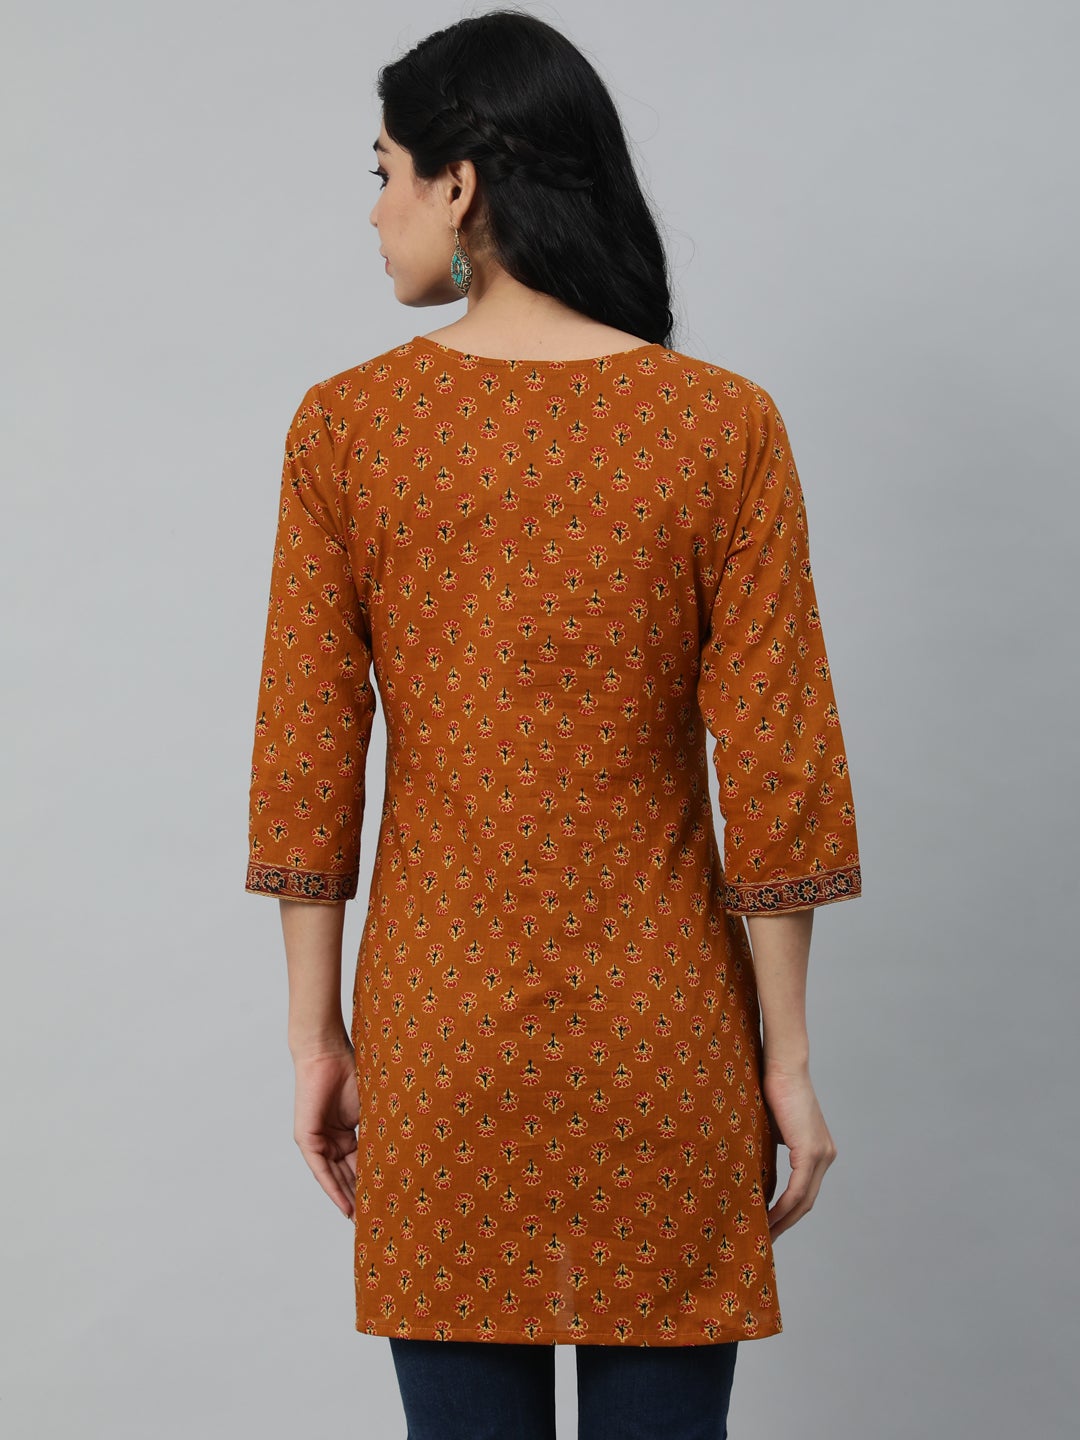 Copy of Women's Mustard & Red Printed Tunic - Nayo Clothing USA